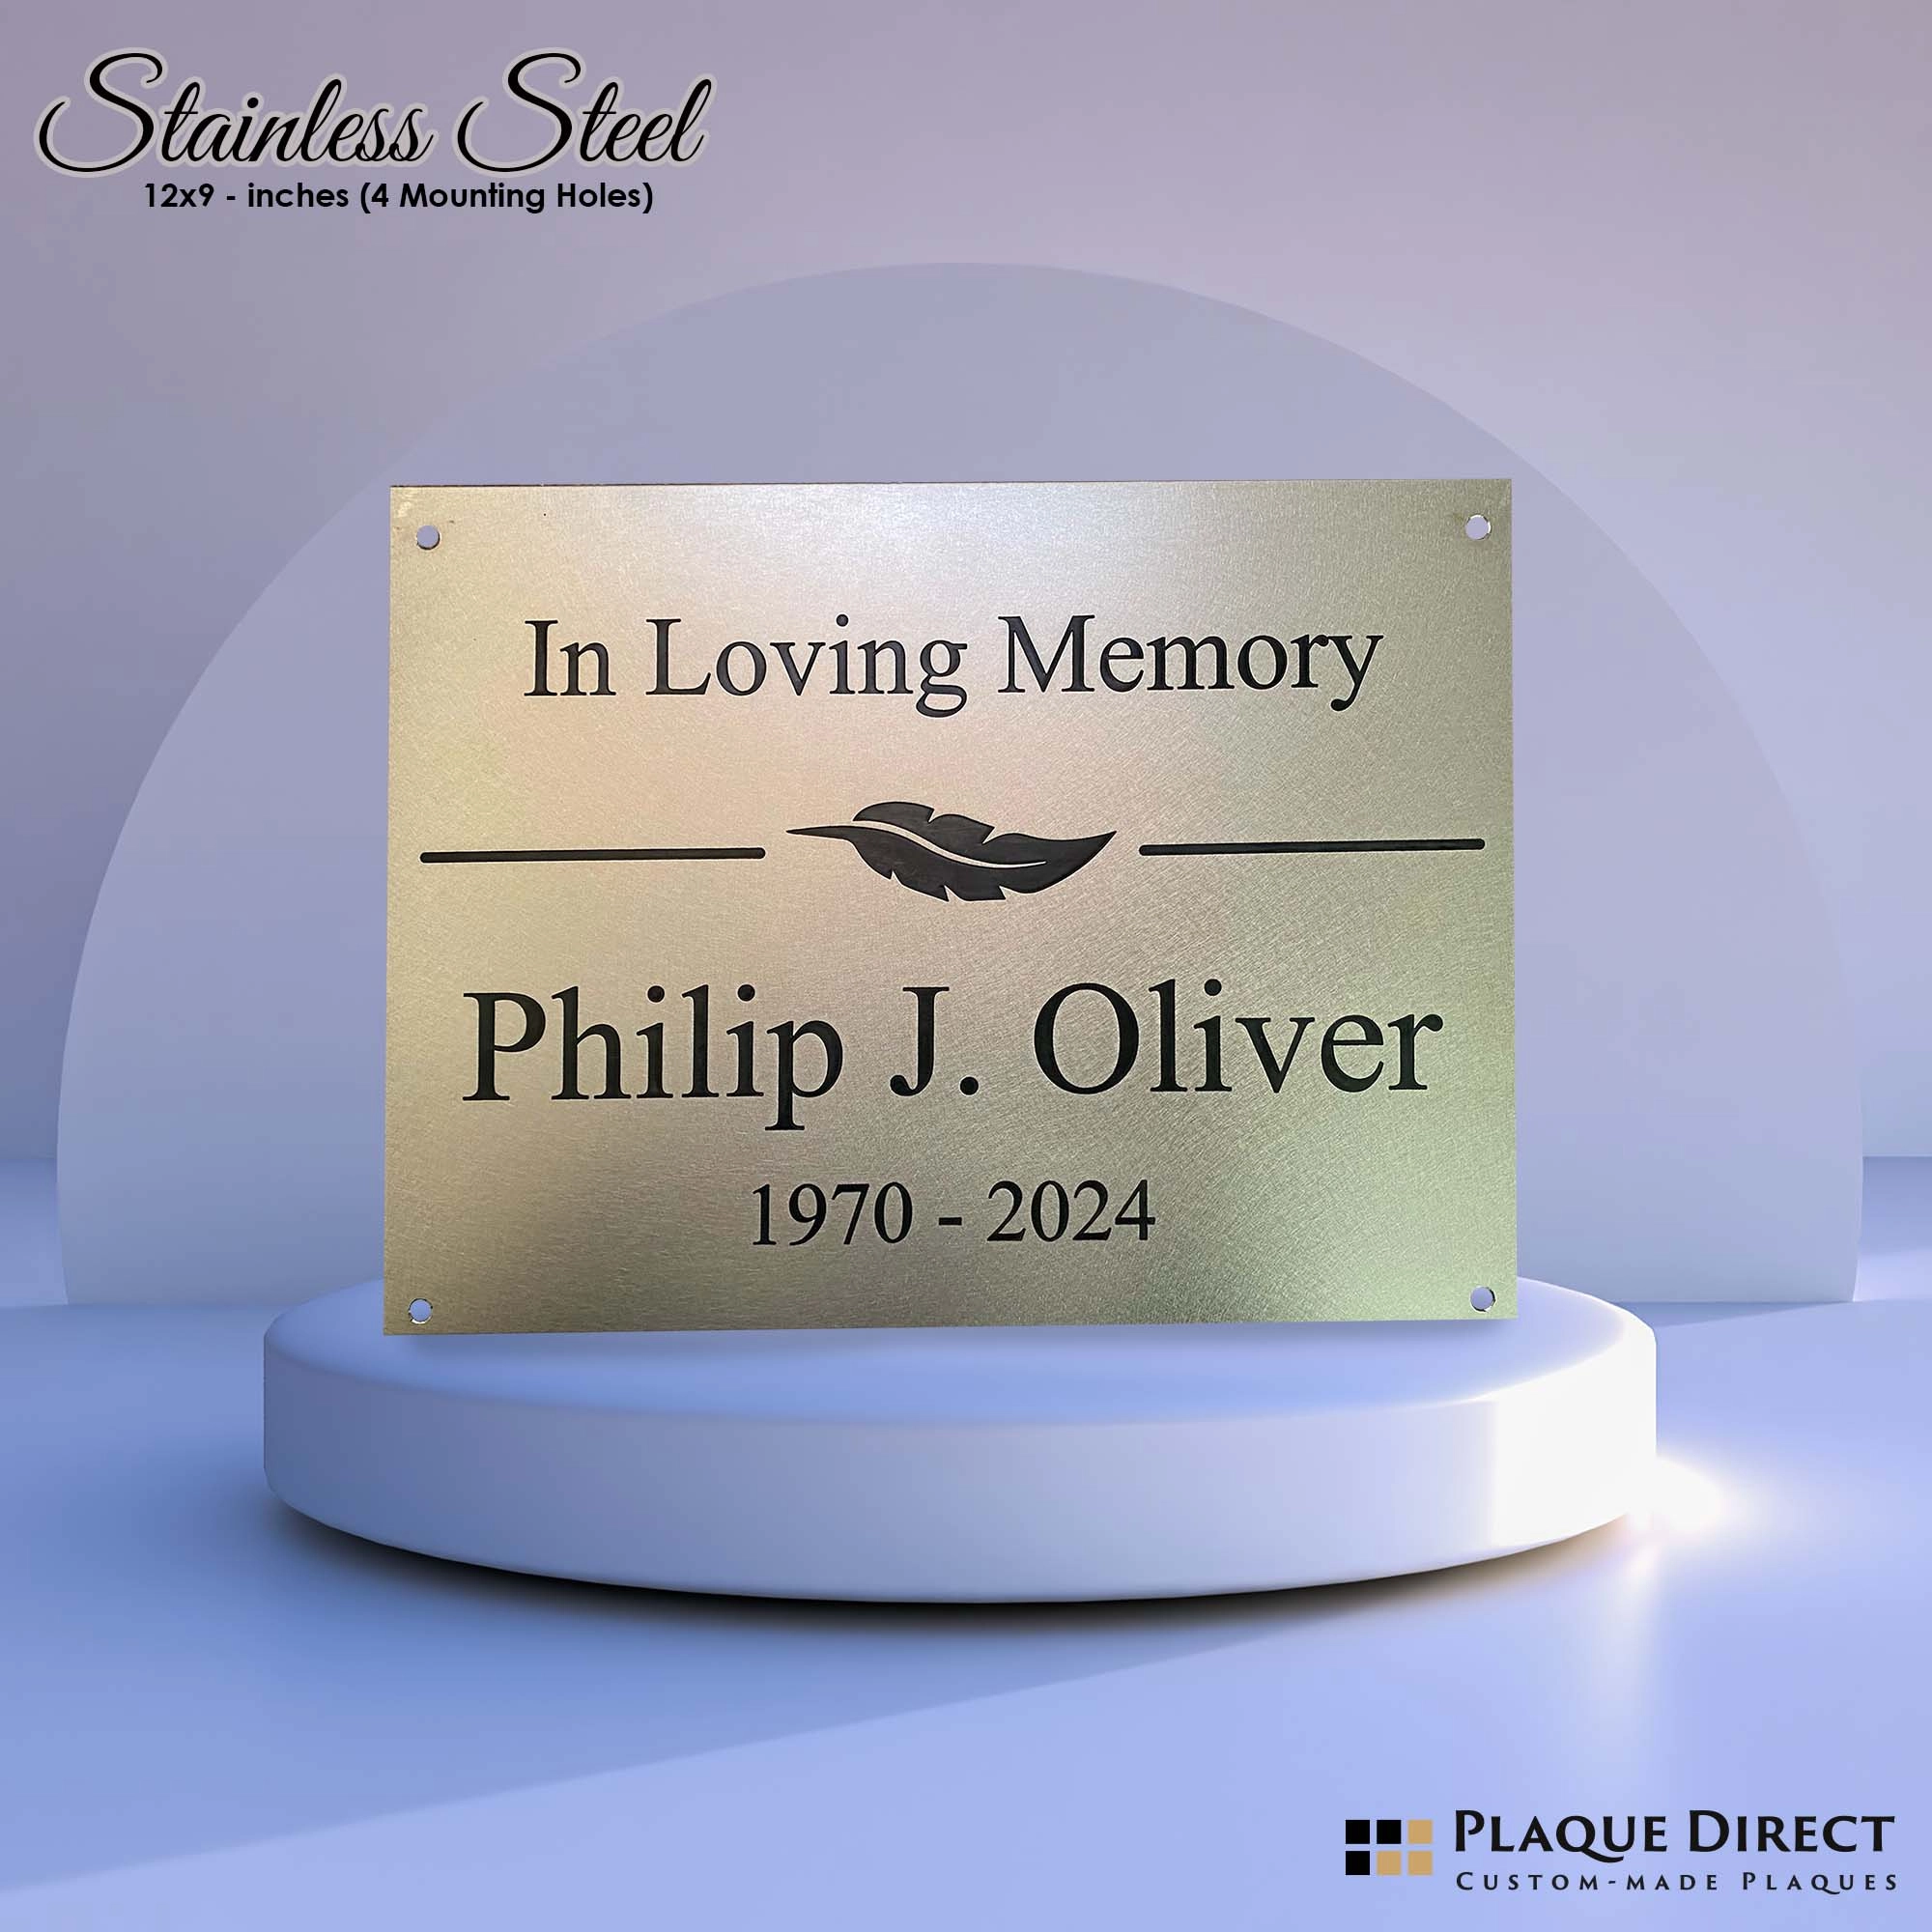 Stainless Steel Plaque (4 mounting holes) - Stainless Steel Plaque (4 mounting holes)